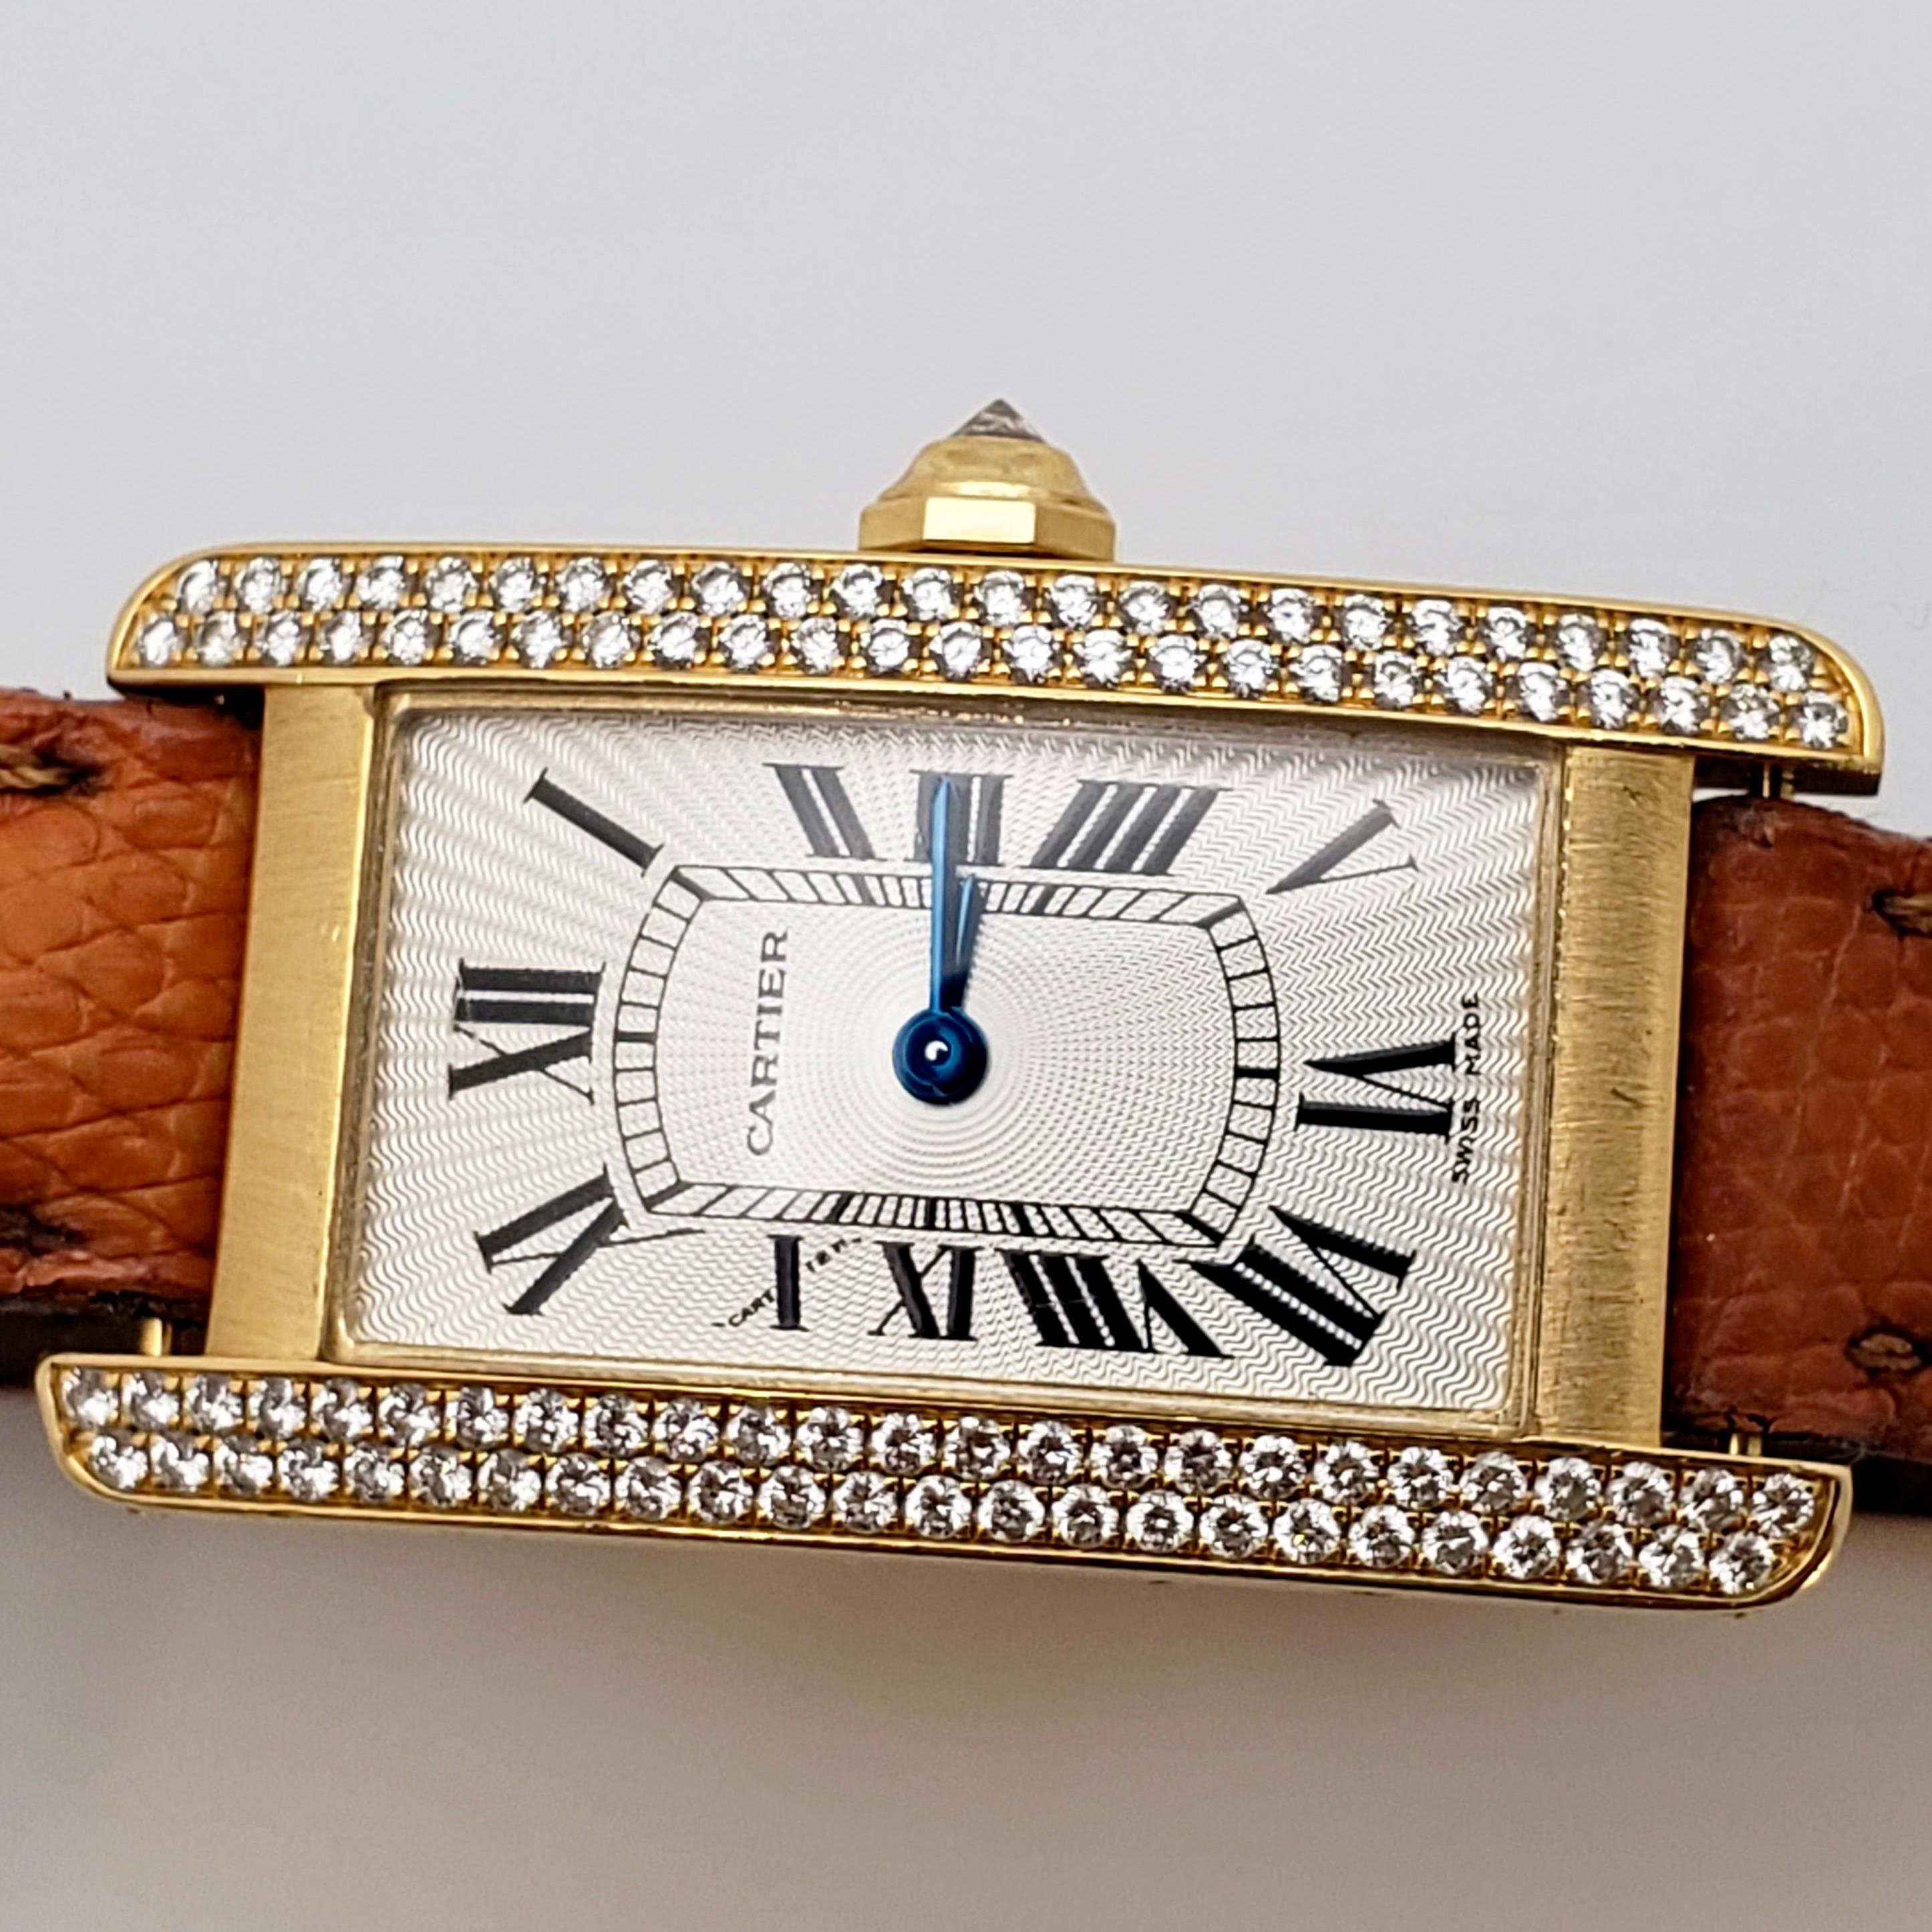 An authentic 18K yellow gold Cartier Tank Americane watch (model #: 2482) with an original diamond bezel. Mounted with 98 round brilliant cut diamonds weighing a total of approximately 1.00 CT. This beautiful watch features quartz movement and a